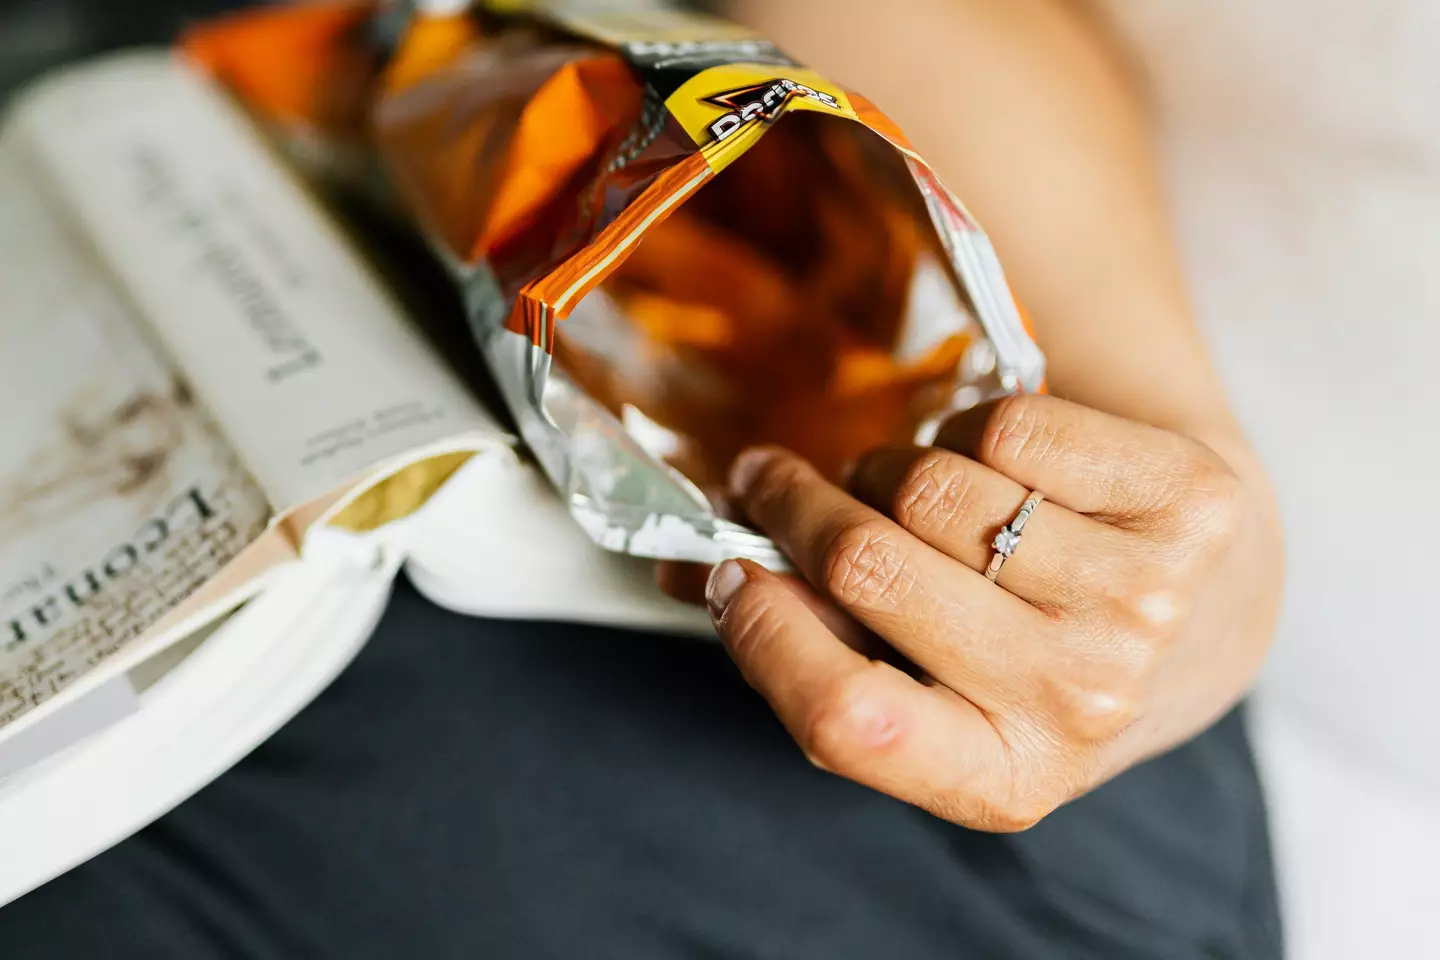 The Dorito Theory has people questioning their worst habits.